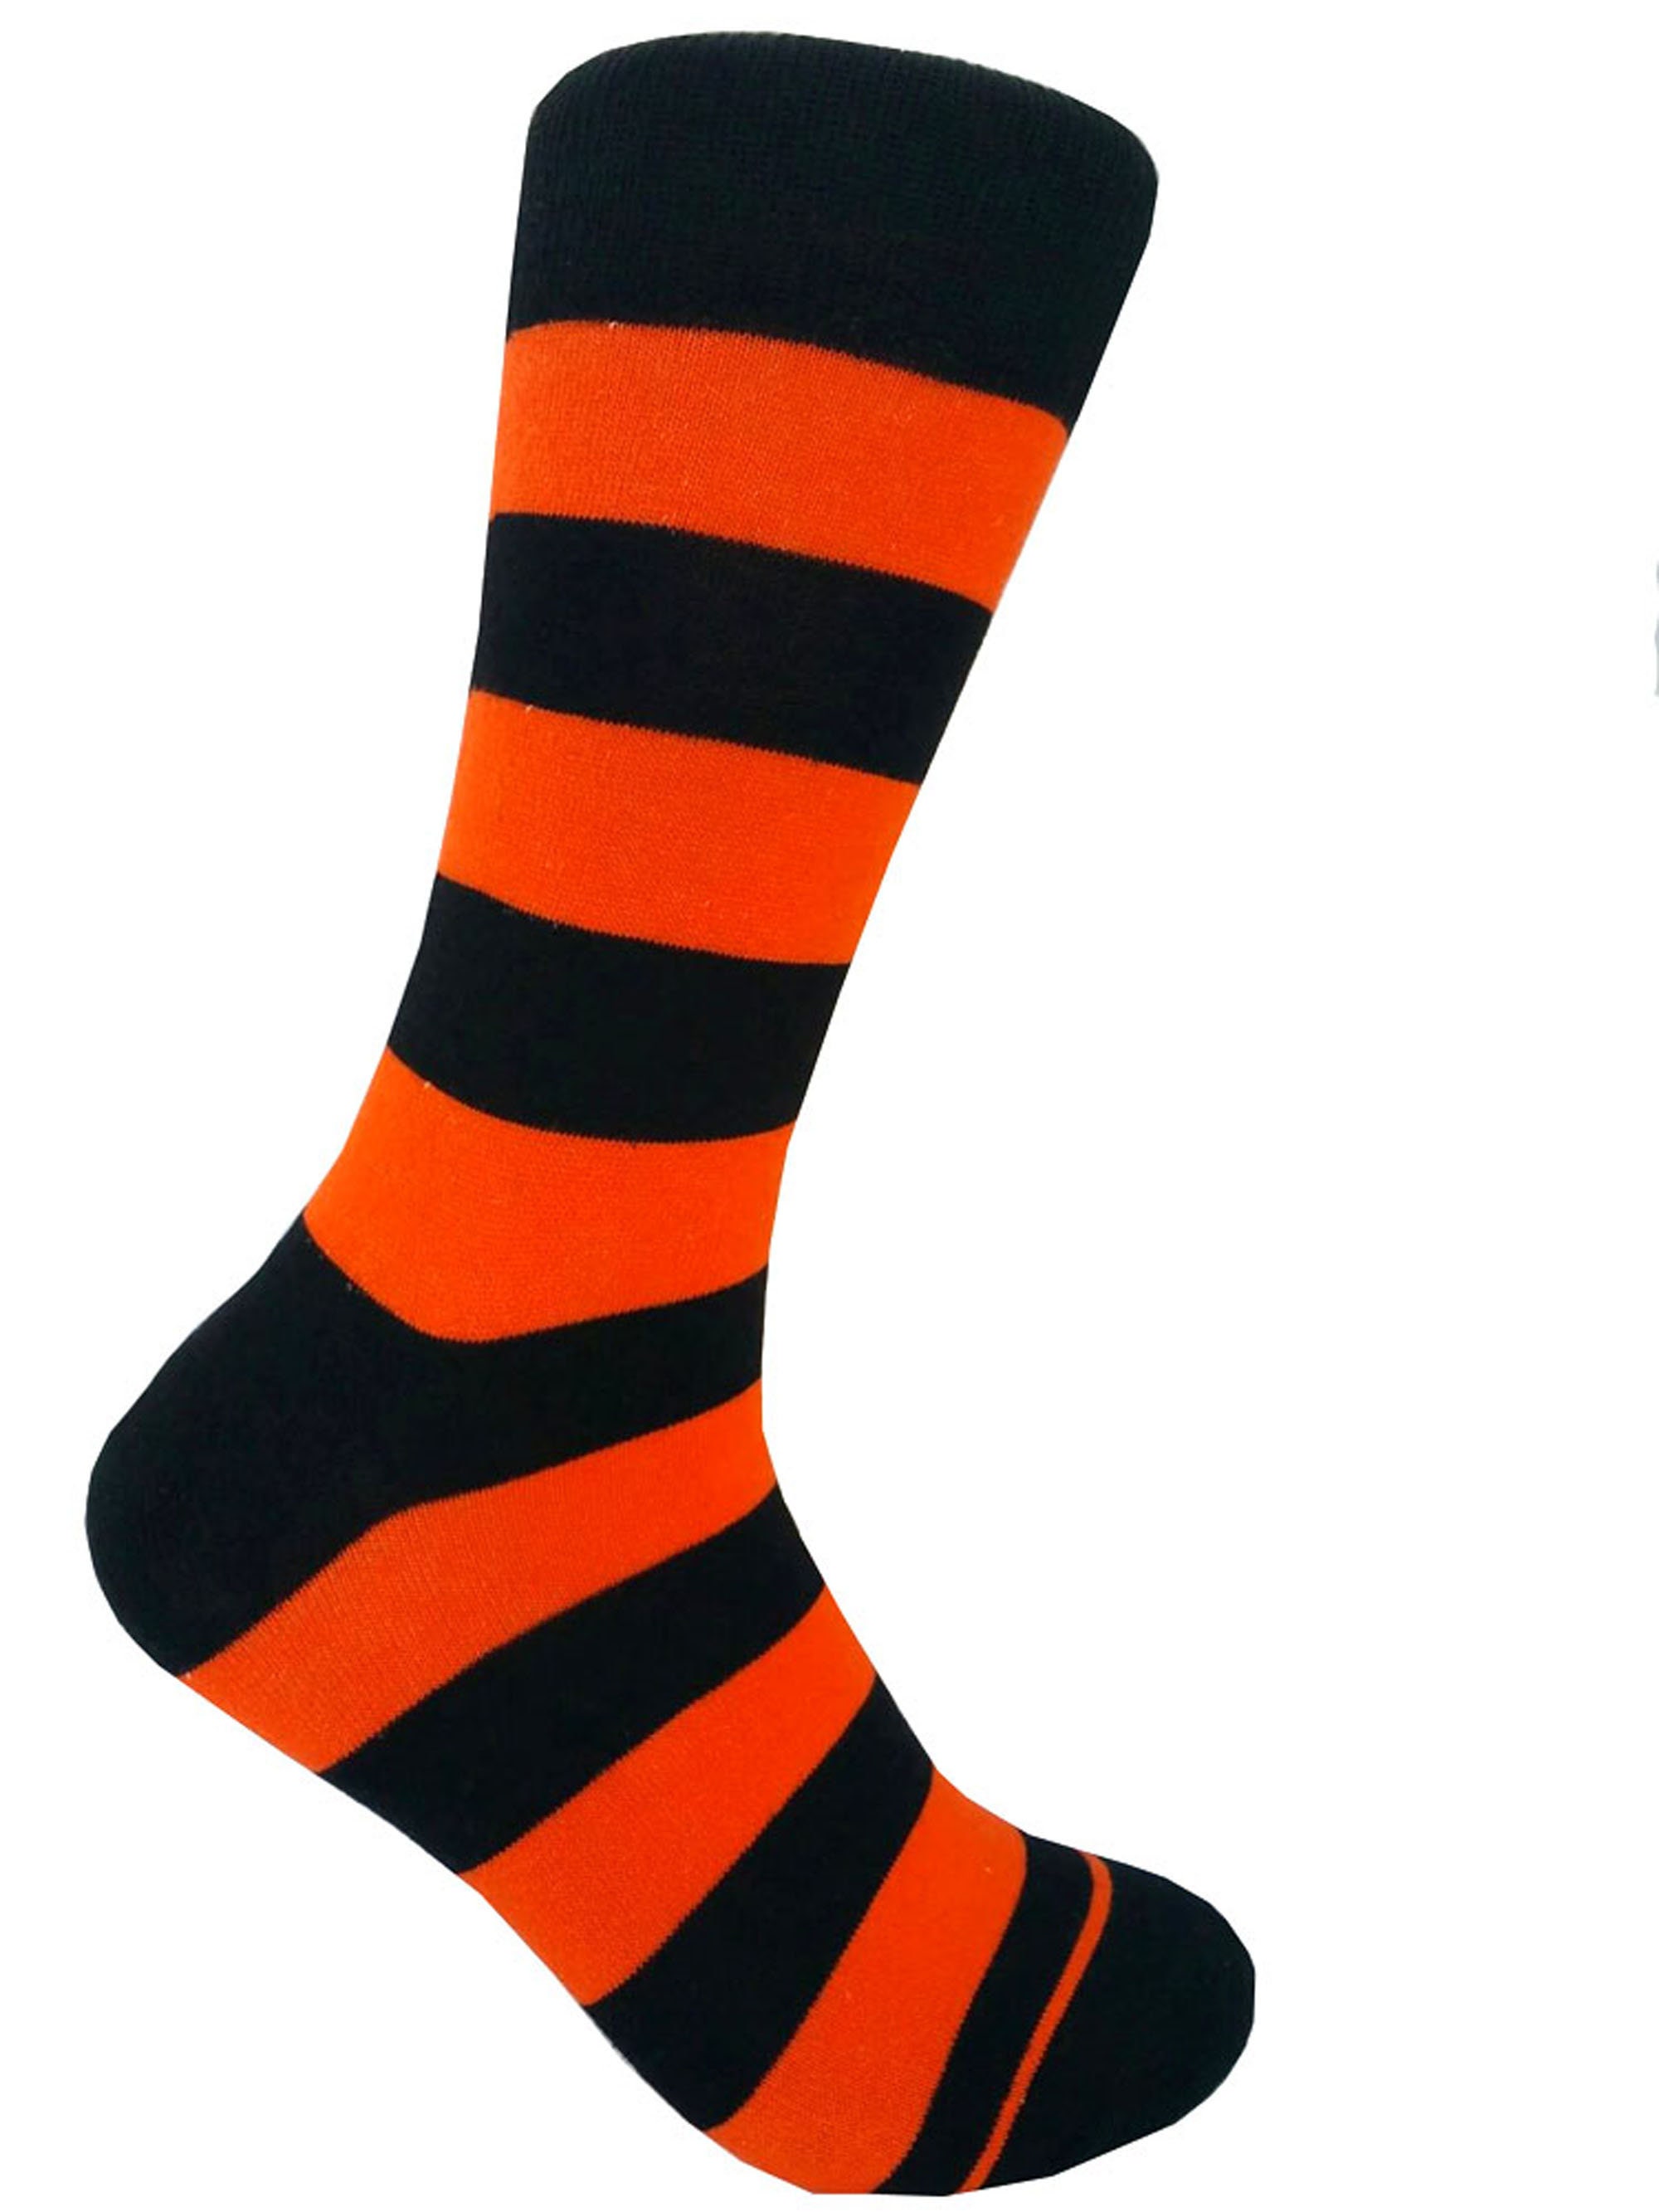 Novelty Men's Black With Multi-colors Stripes Mid-calf - Etsy